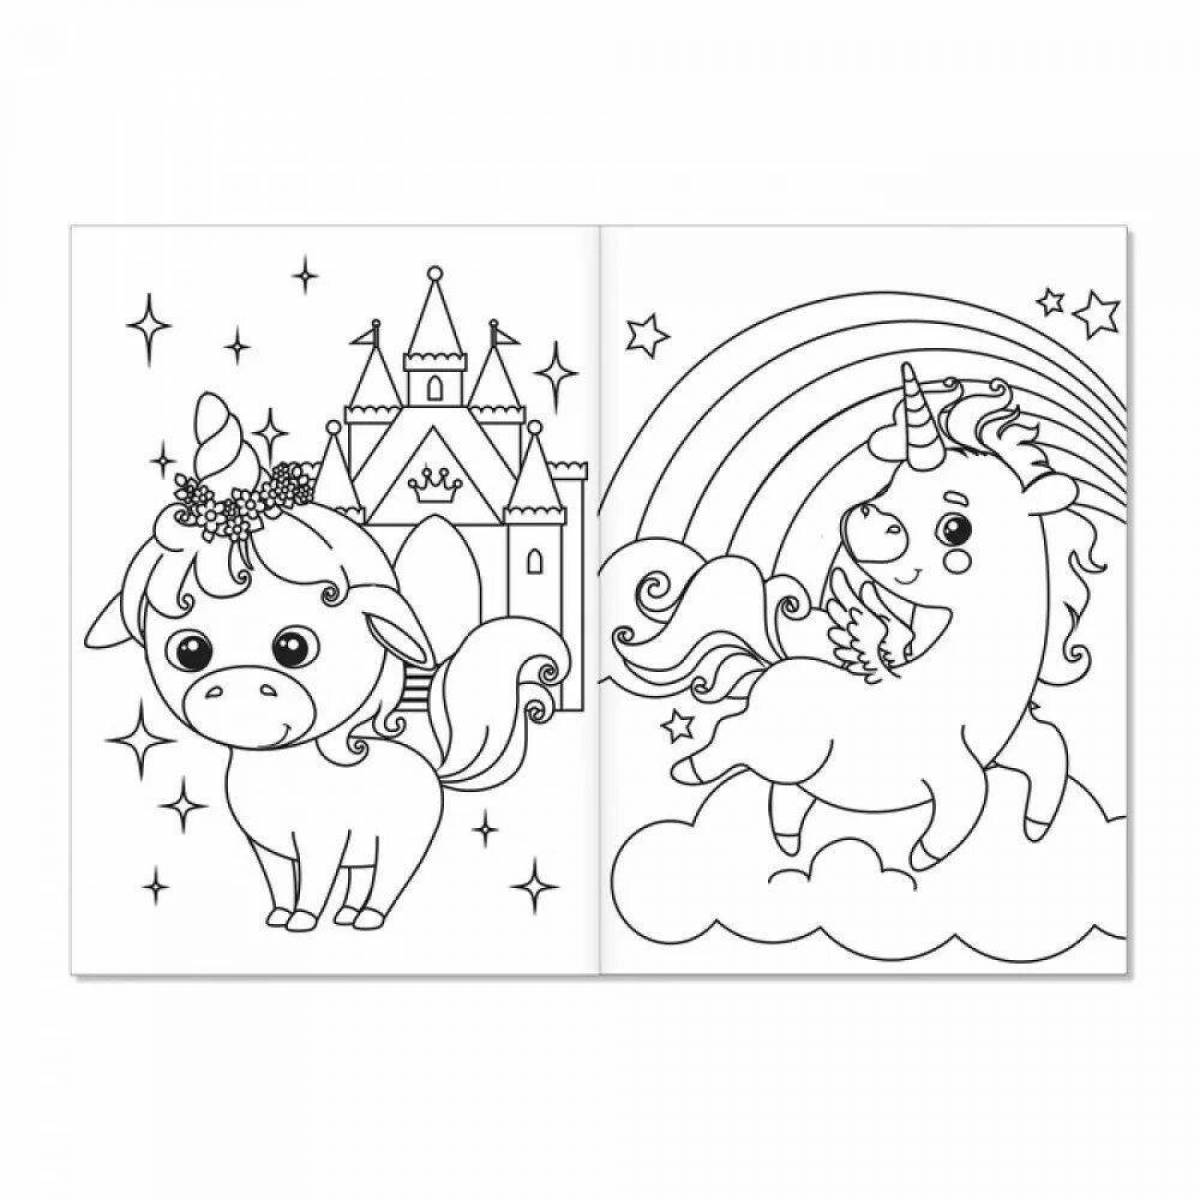 Live coloring 2 for kids